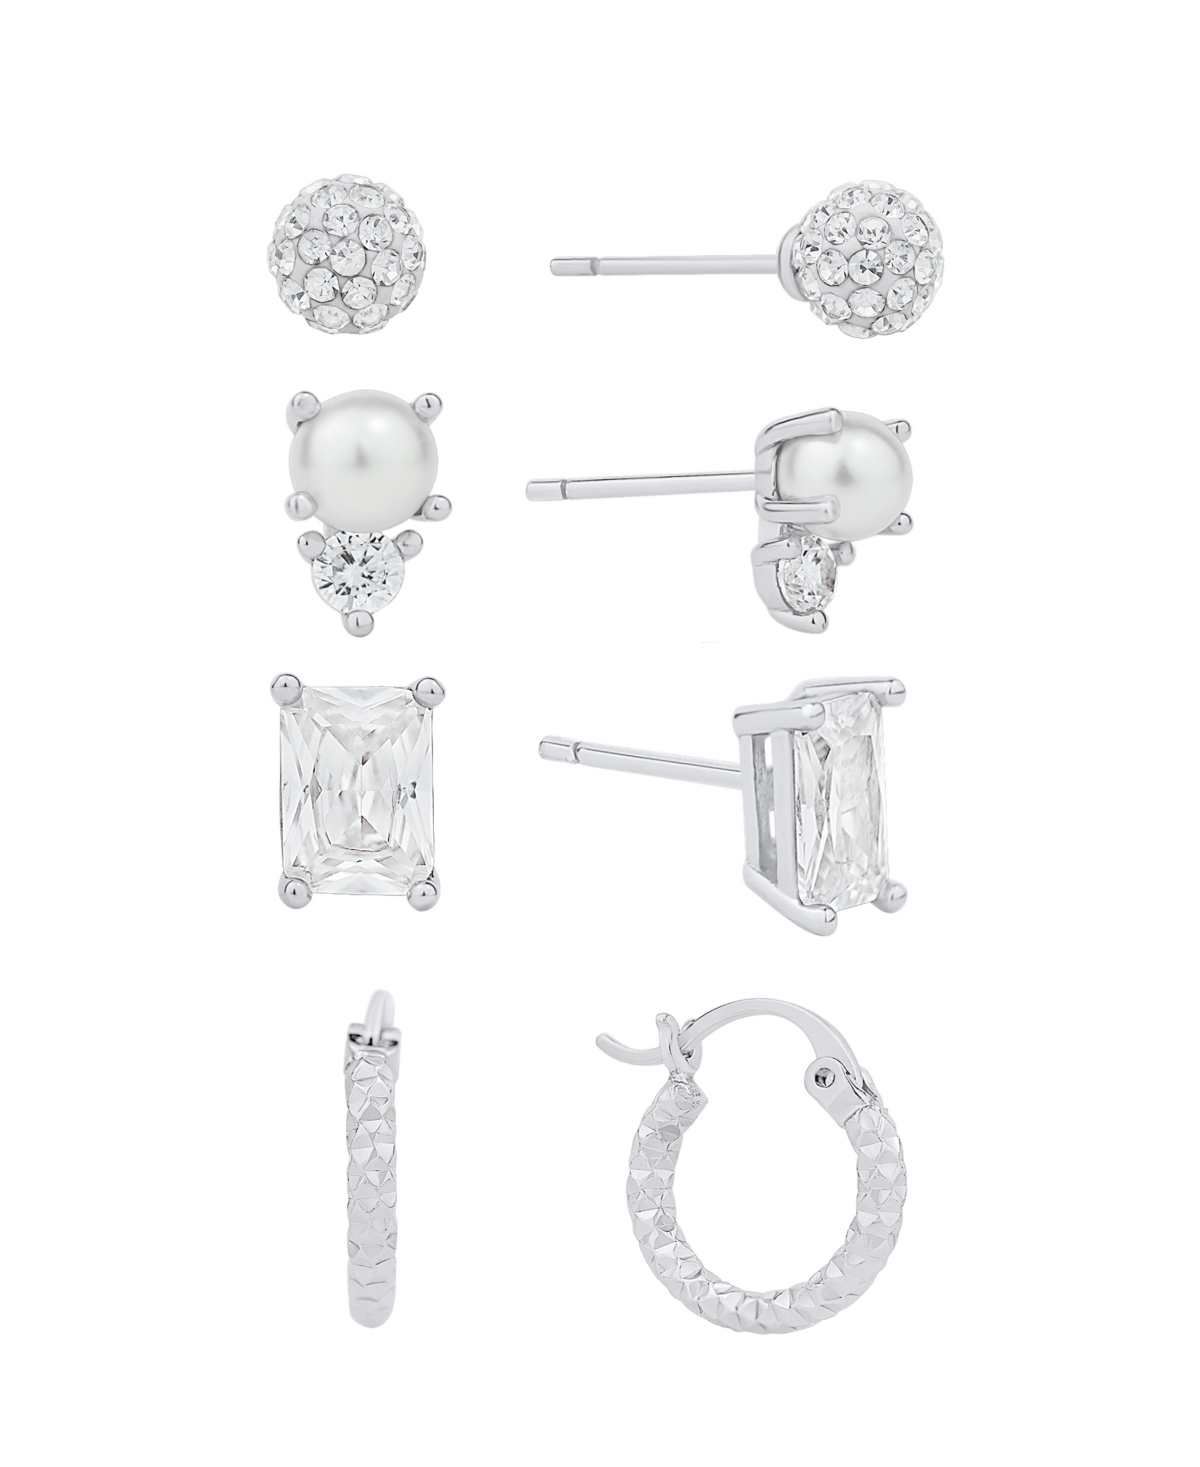 Cubic Zirconia and Imitation Pearl Earring Set - Silver